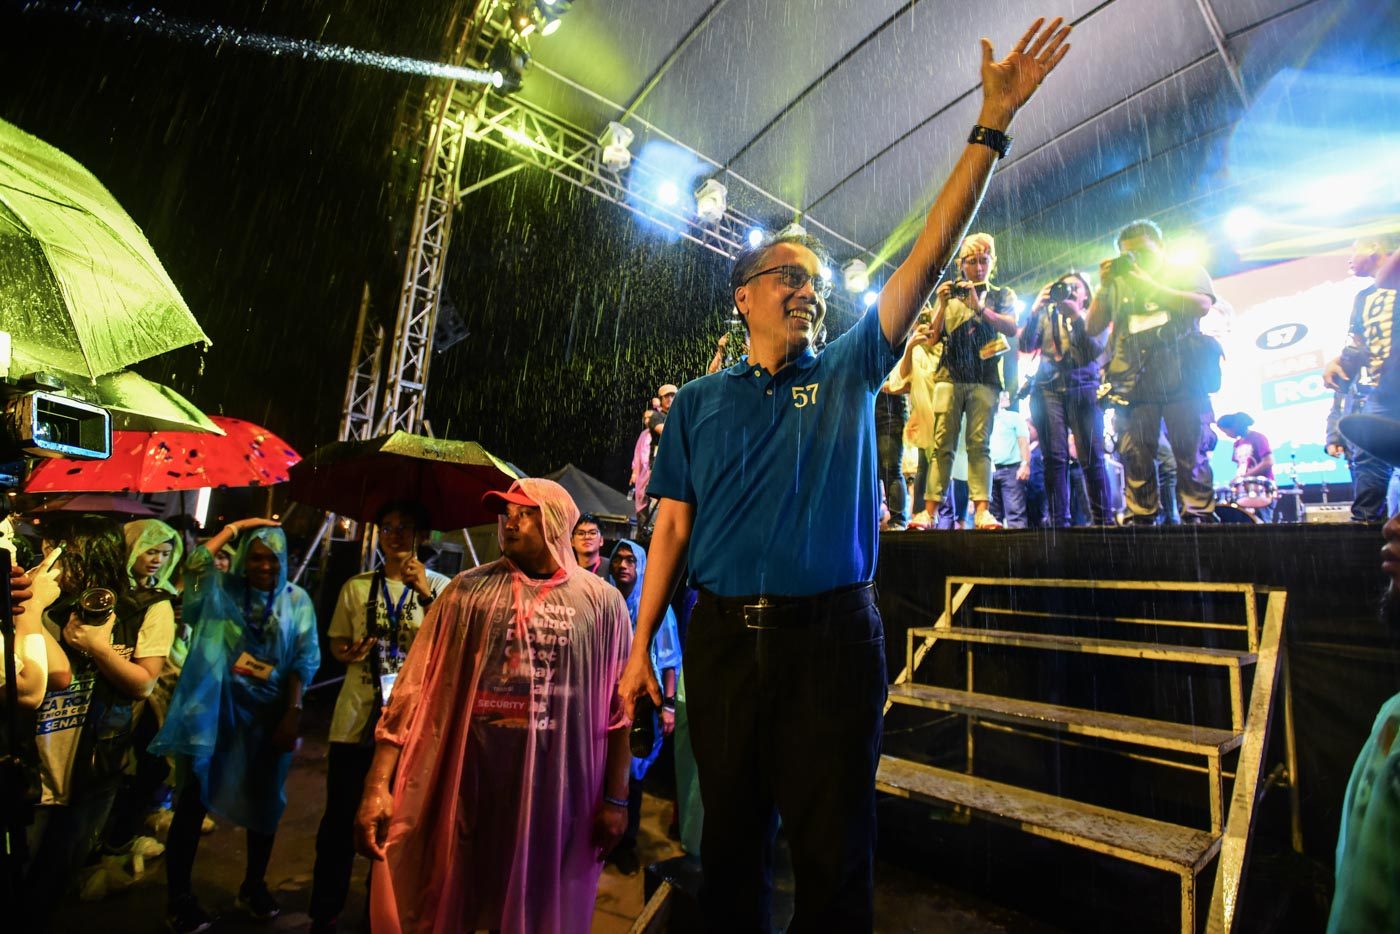 For 3rd time, Mar Roxas is rejected at polls